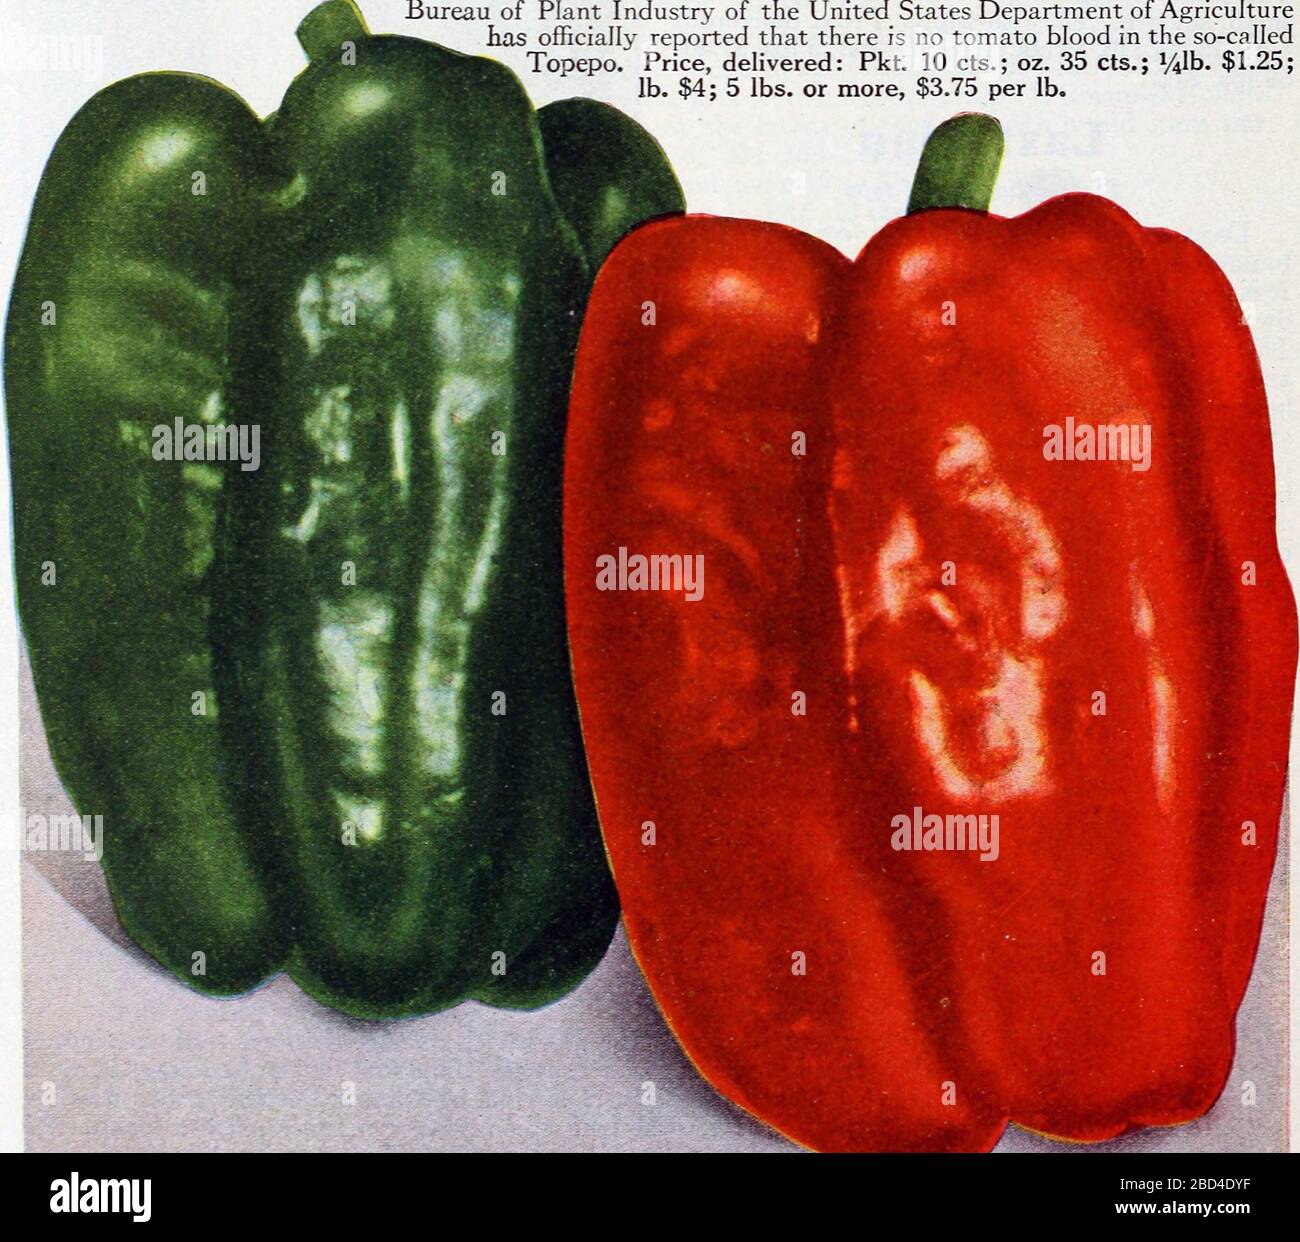 Historical Food Illustration - Green Bell Pepper and Red Bell Pepper - Image from page 35 of "Eighty-five super-standard strains season of 1927" (1927) Stock Photo